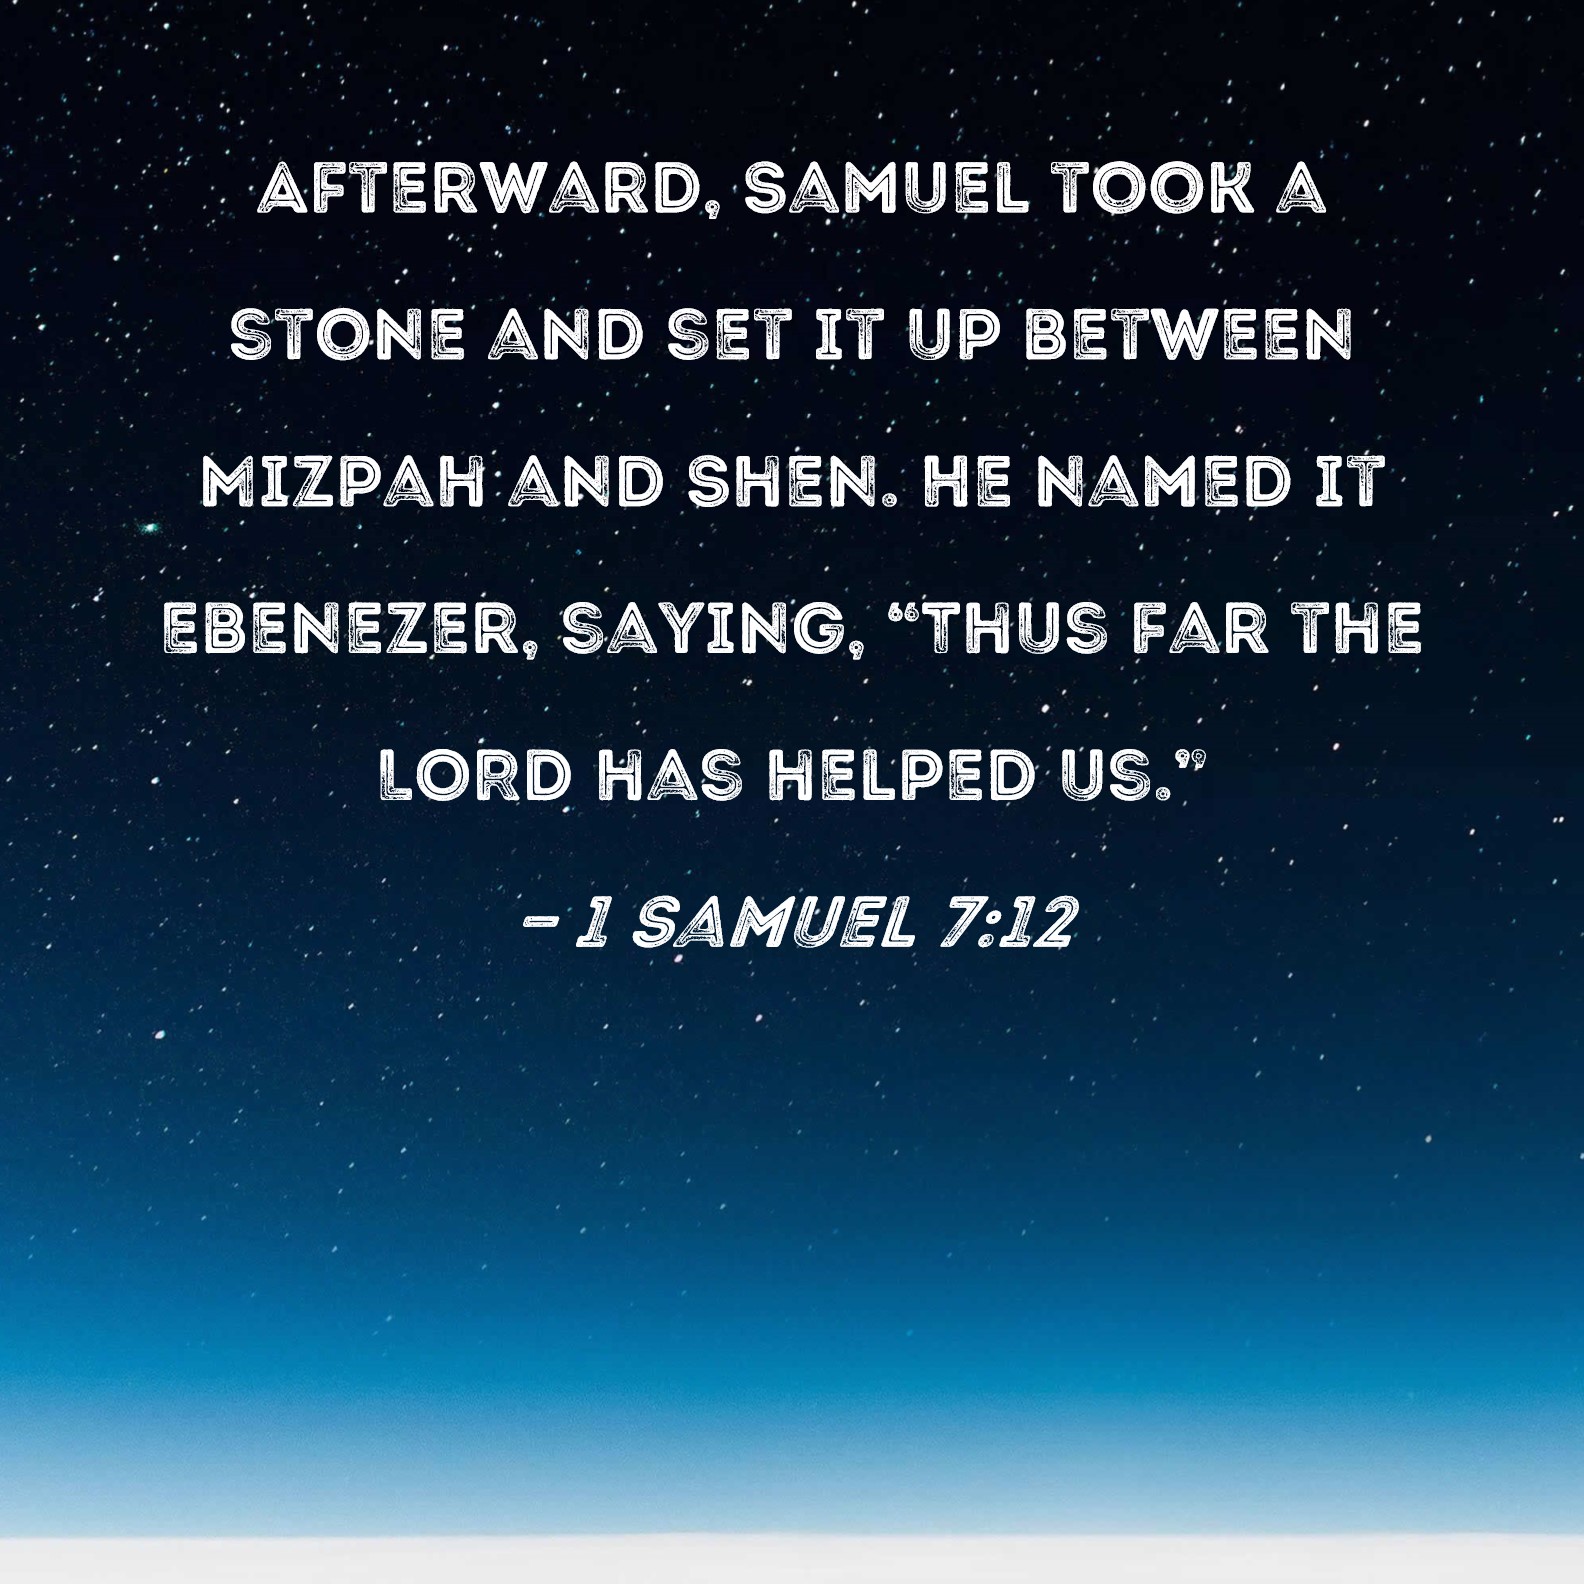 1 Samuel 7:12 Afterward, Samuel took a stone and set it up between Mizpah  and Shen. He named it Ebenezer, saying, "Thus far the LORD has helped us."